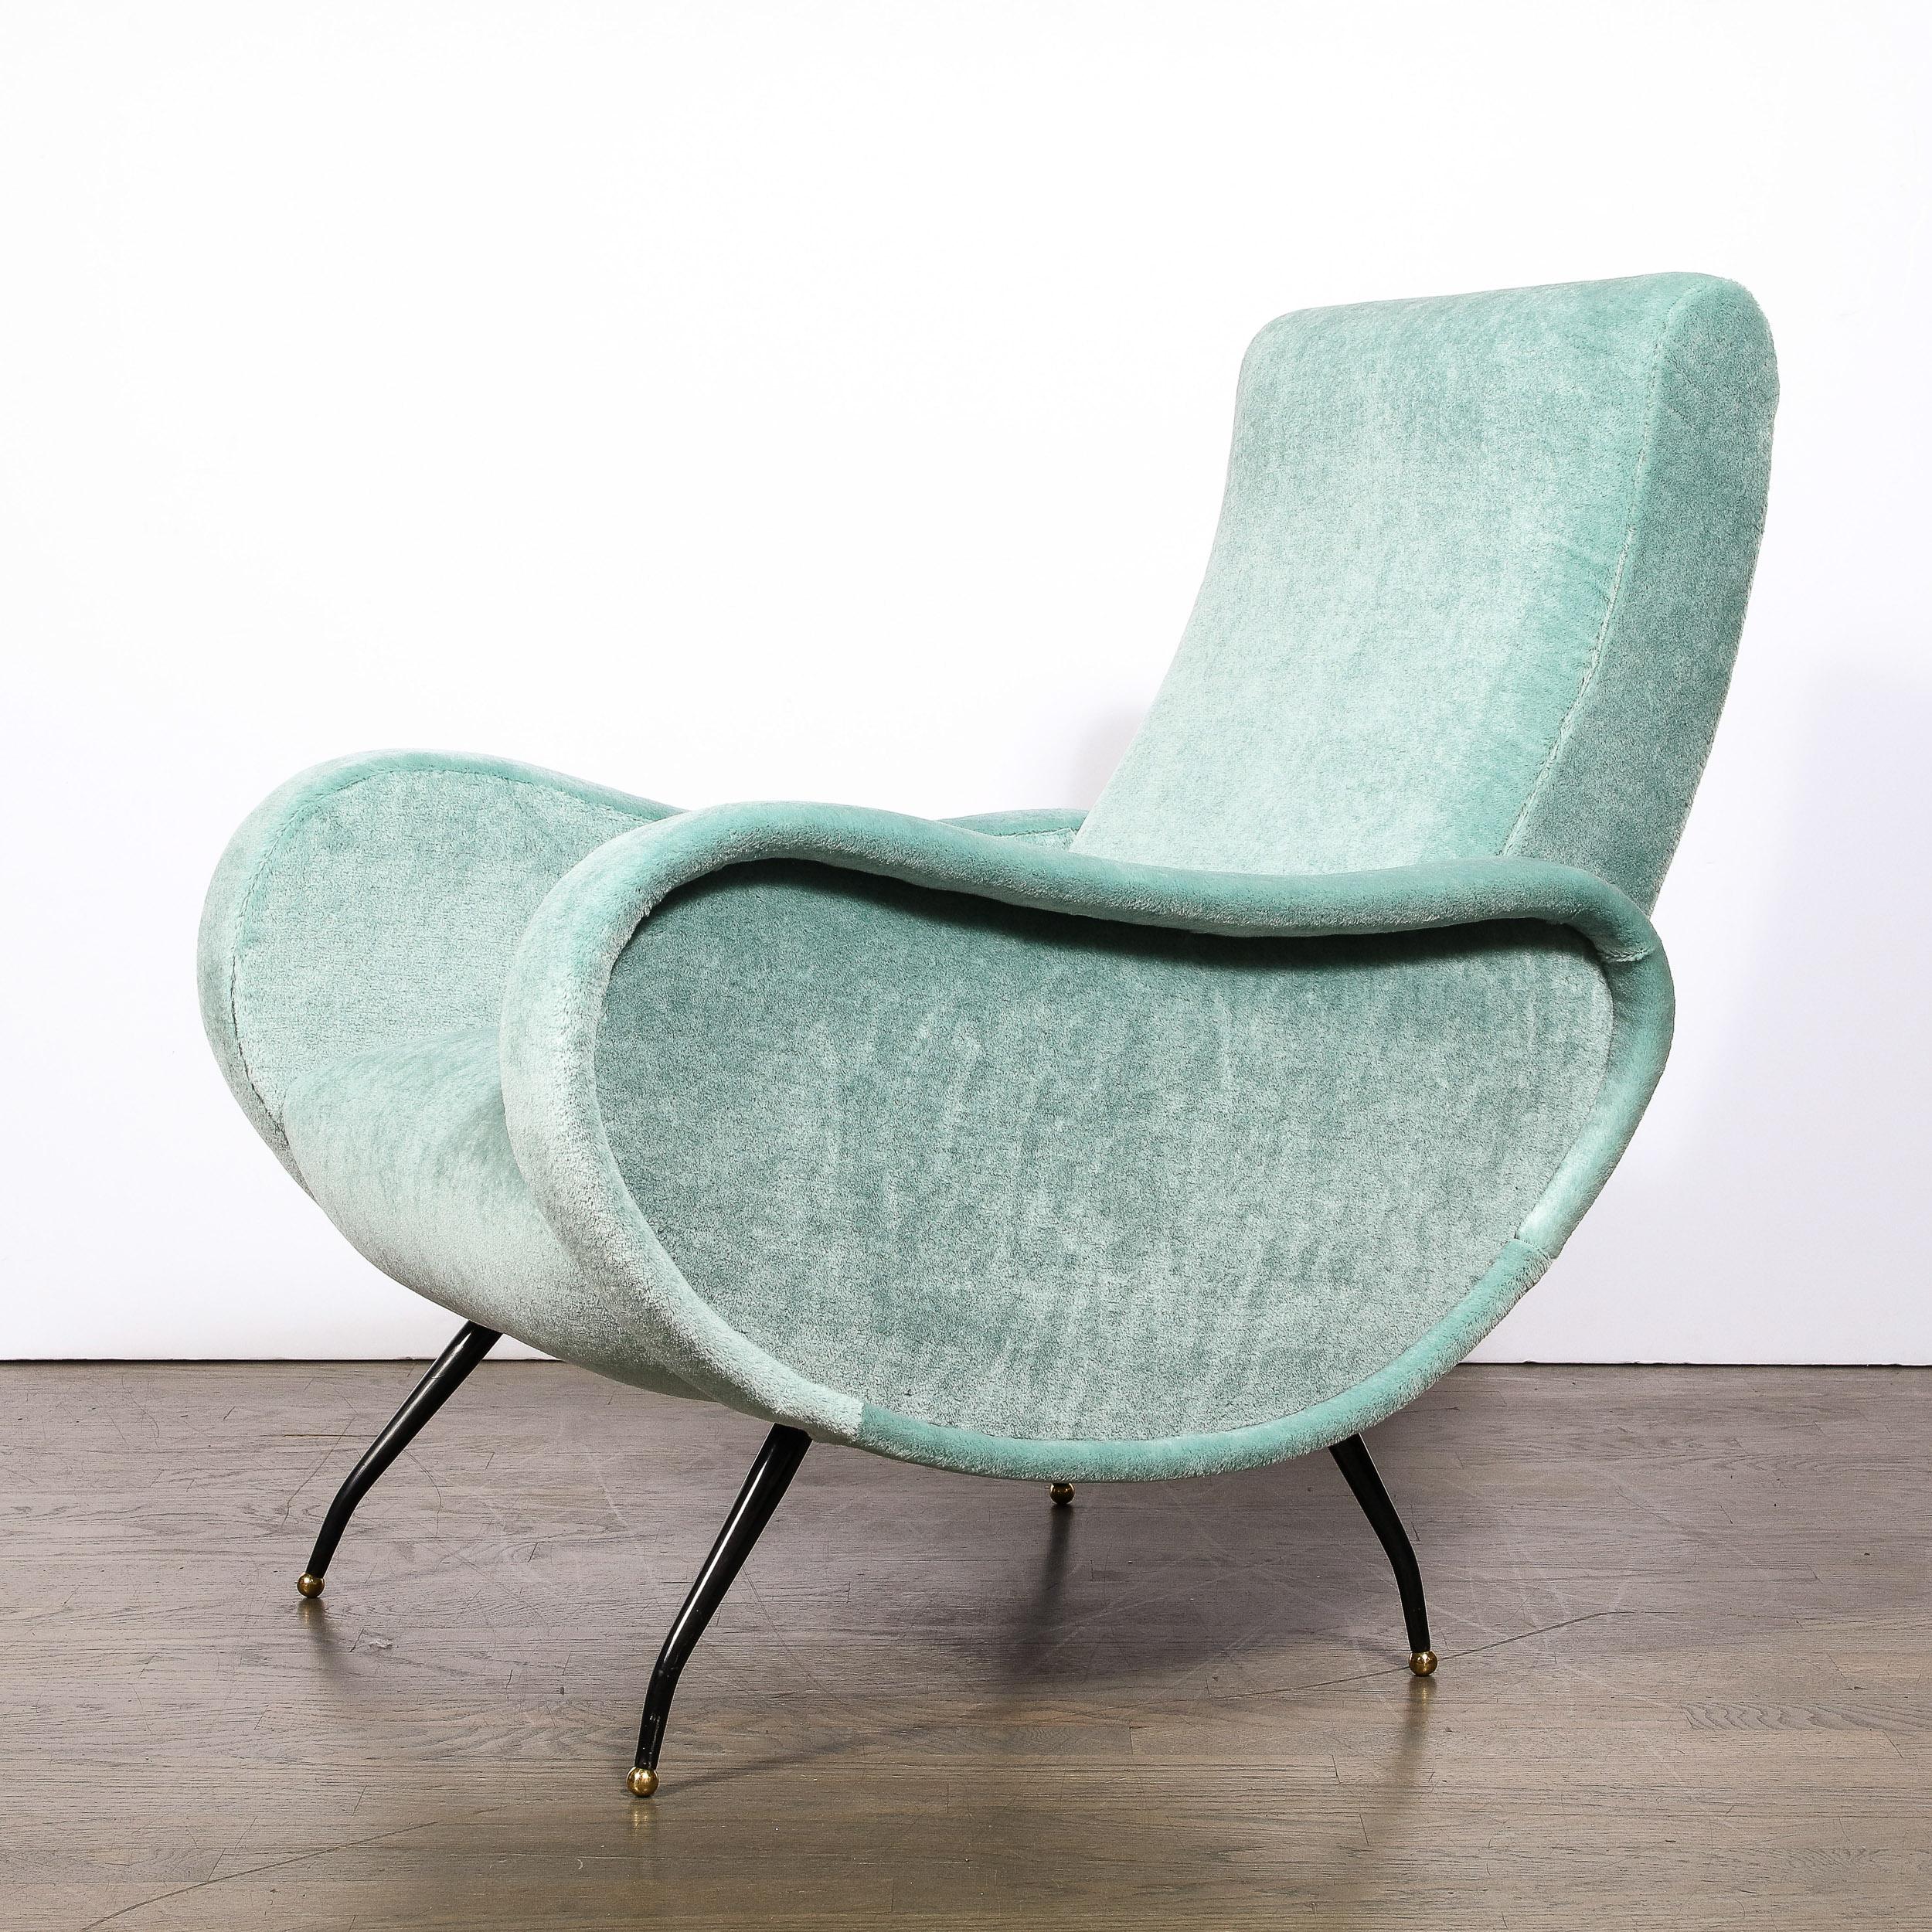 Mid-20th Century Mid-Century Modern 'Lady Arm Chairs' in Aquamarine Mohair by Marco Zanuso